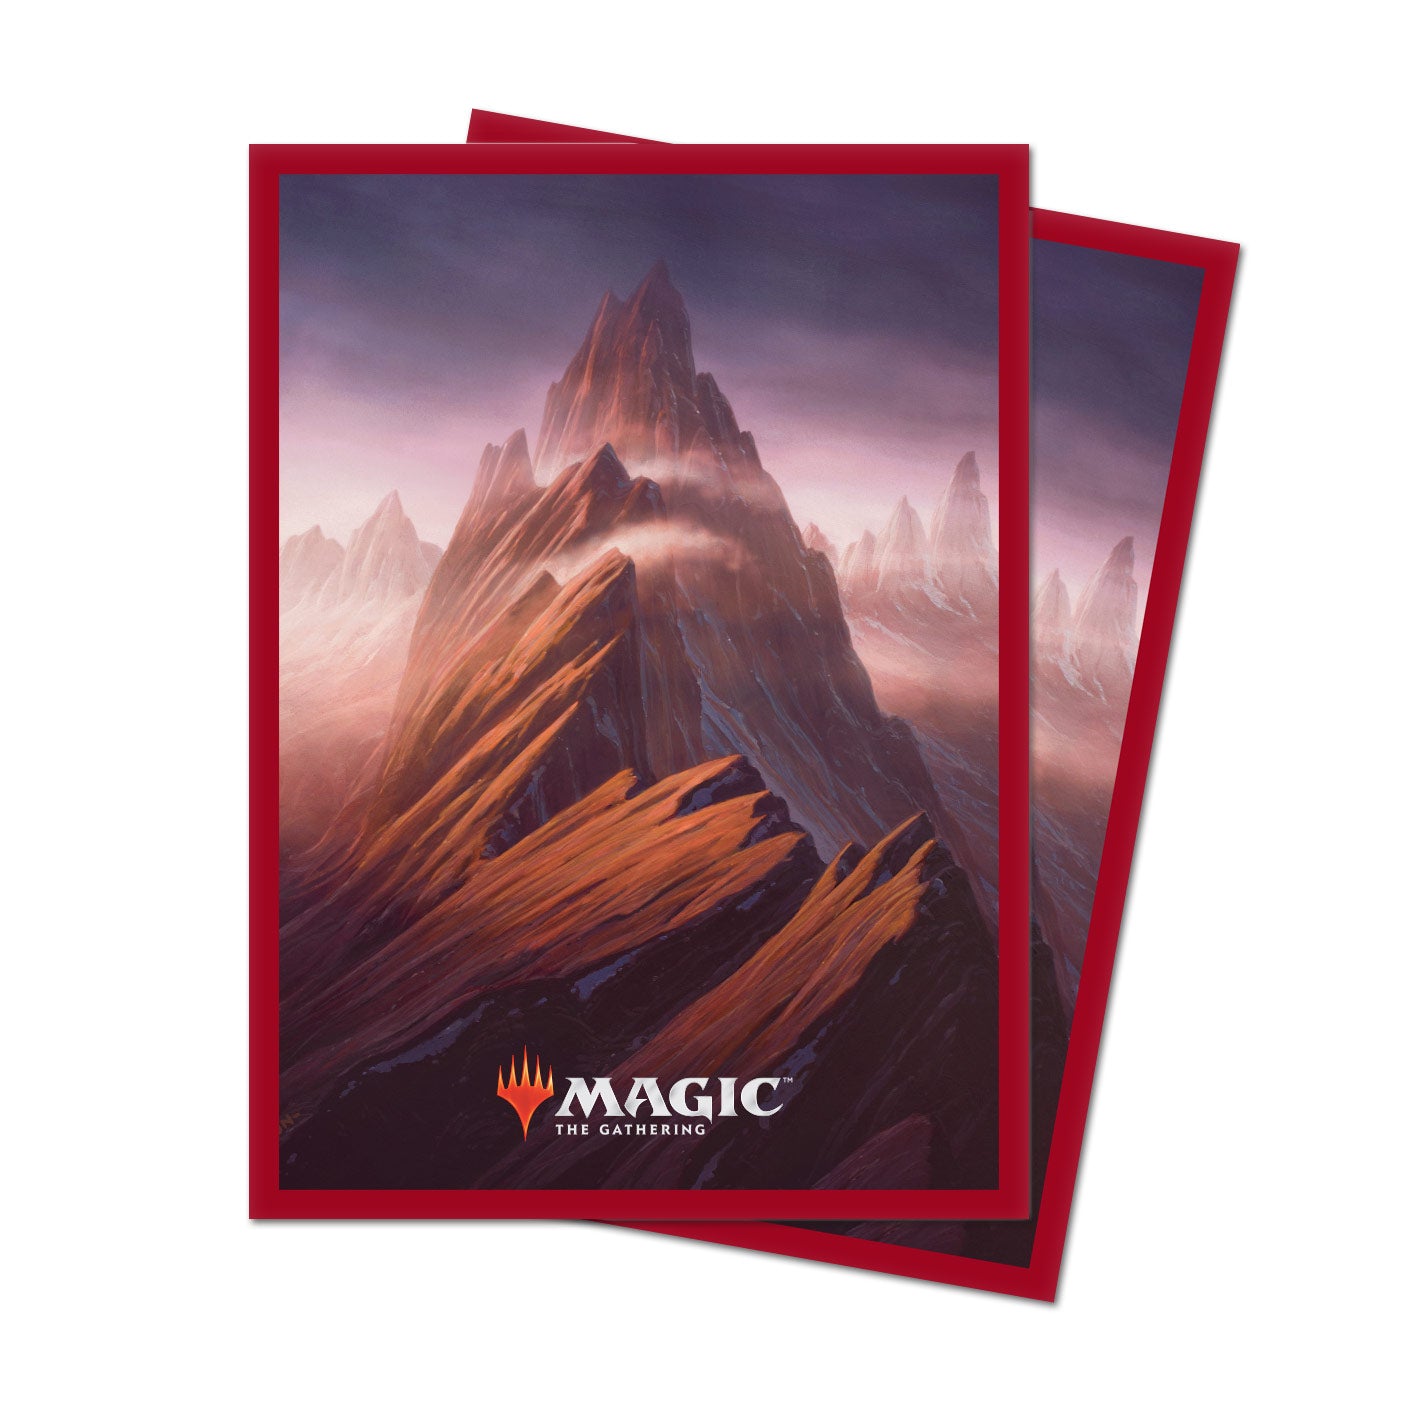 Dominaria United Jaya, Fiery Negotiator Standard Deck Protector Sleeves  (100ct) for Magic: The Gathering